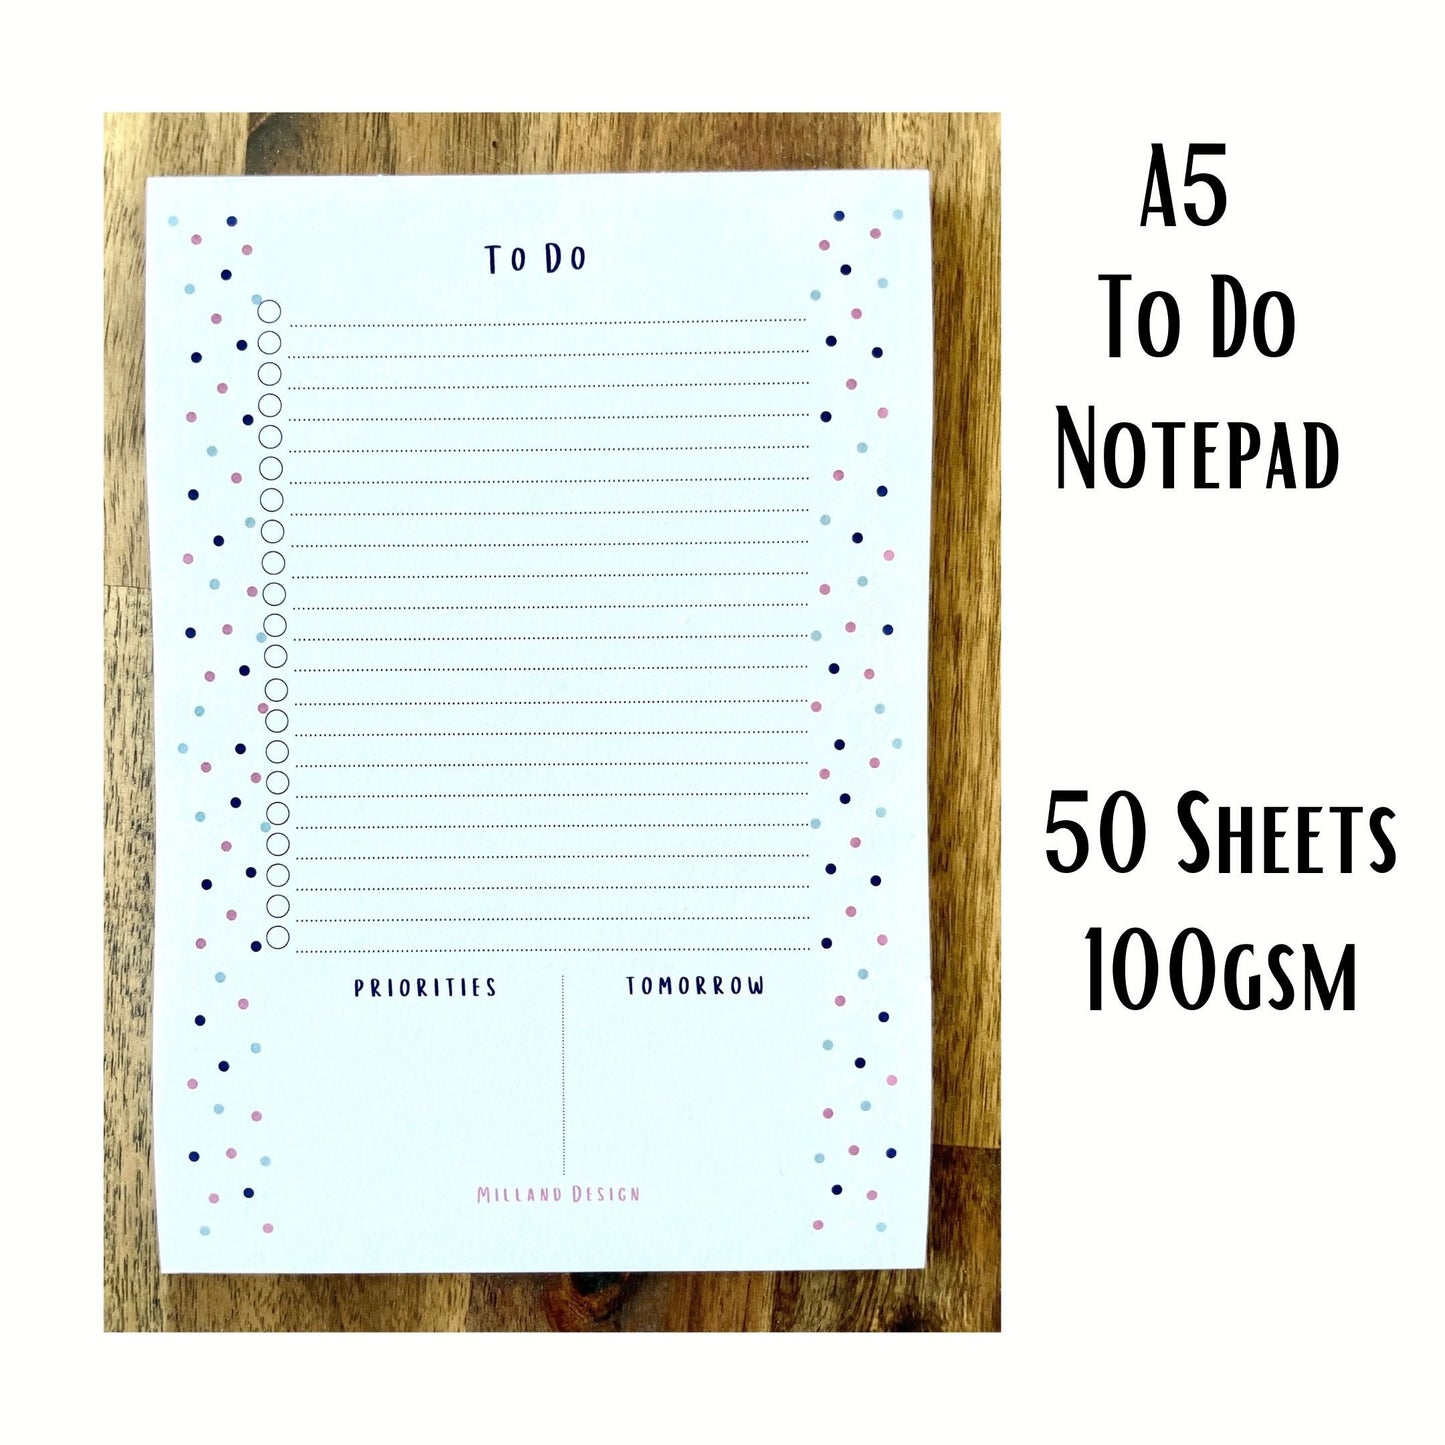 A5 To Do Notepad